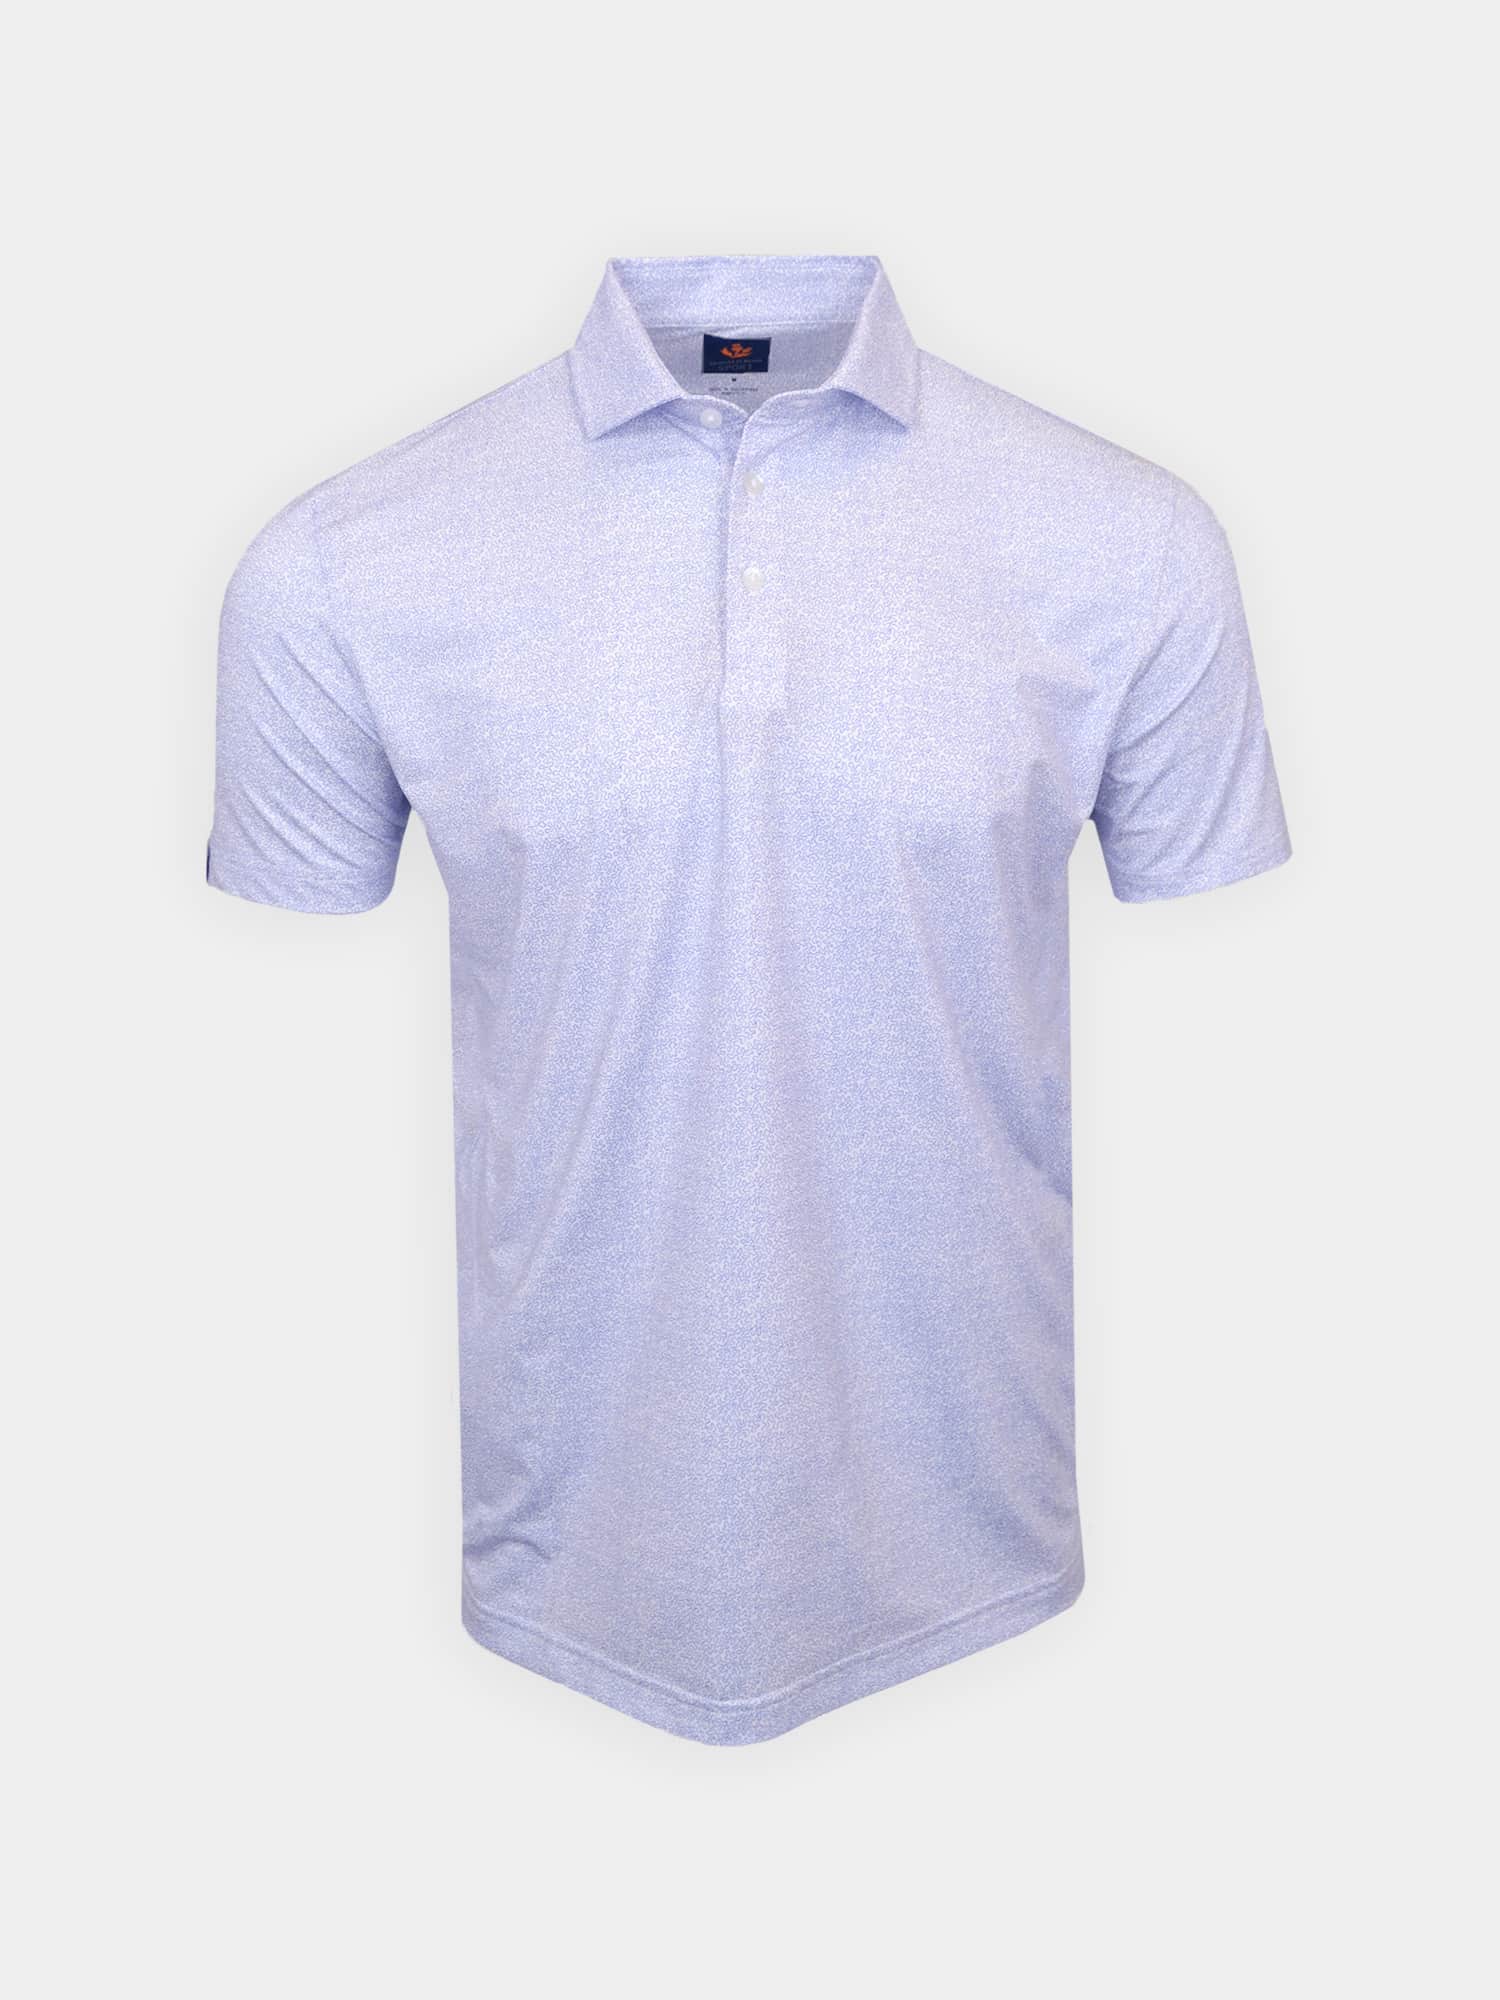 Men's Squiggles Print Polo - Sport Fit - Donald Ross Sportswear